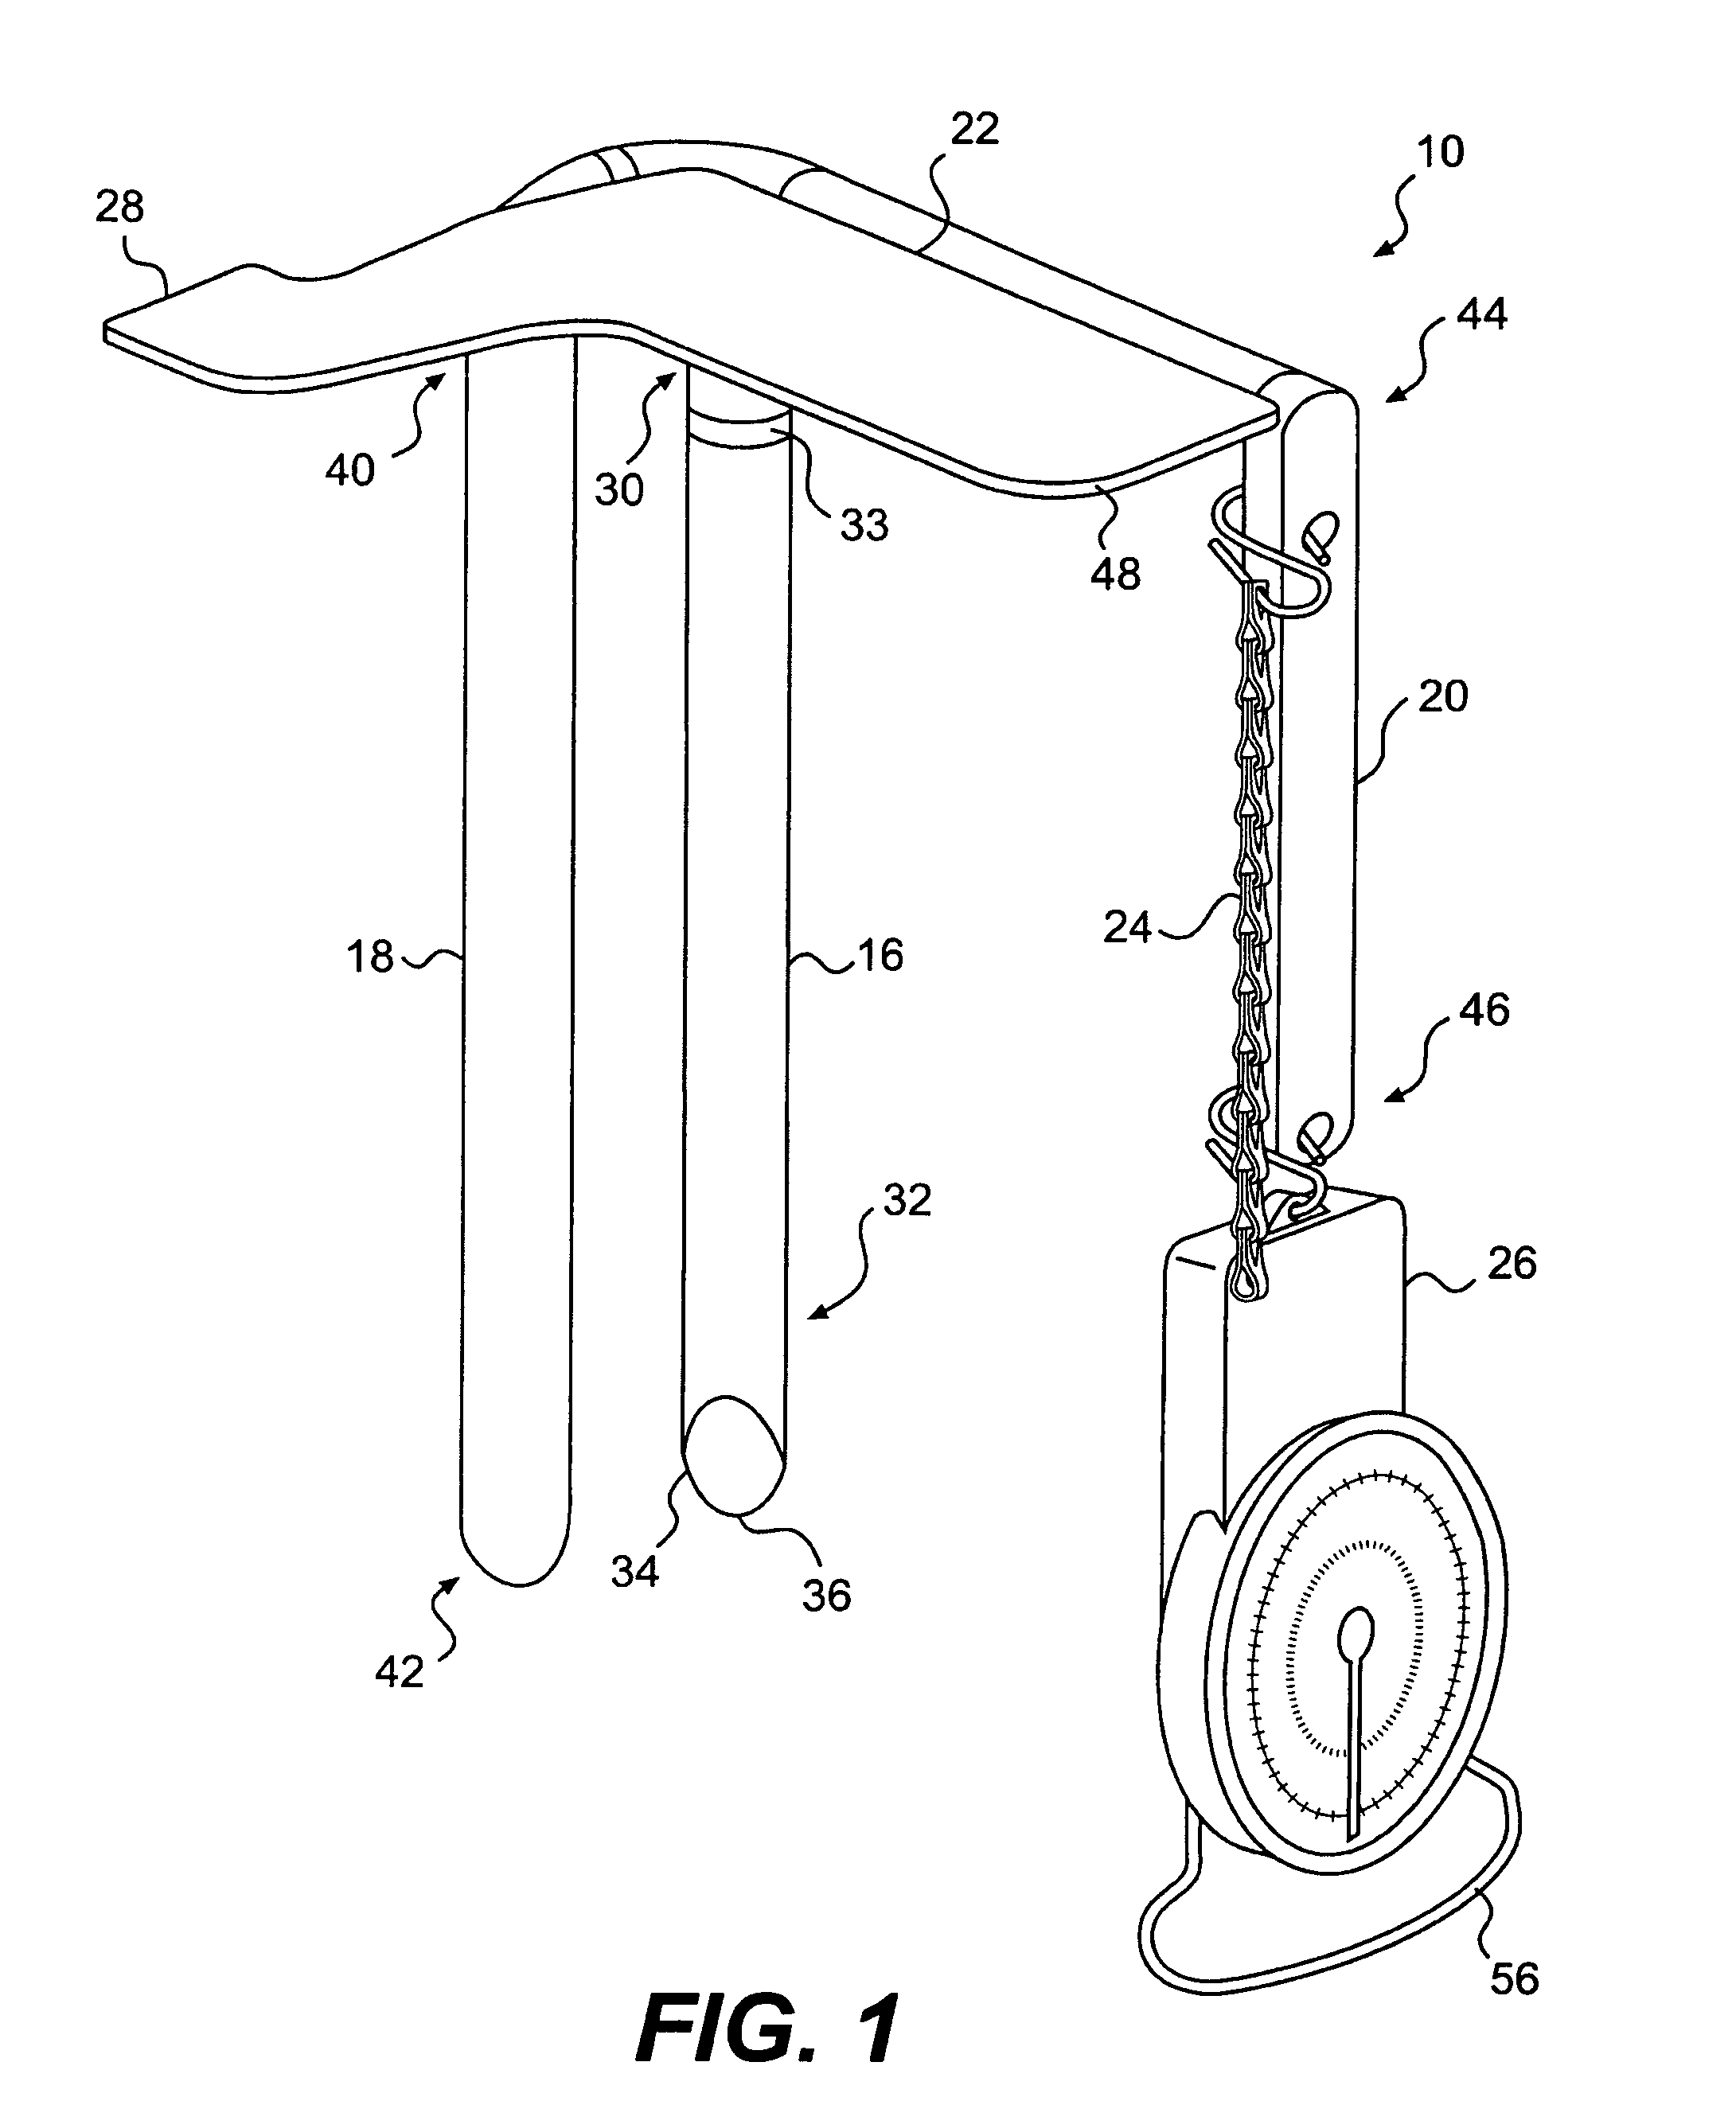 Apparatus and method for measuring containment force in a wrapped load and a control process for establishing and maintaining a predetermined containment force profile